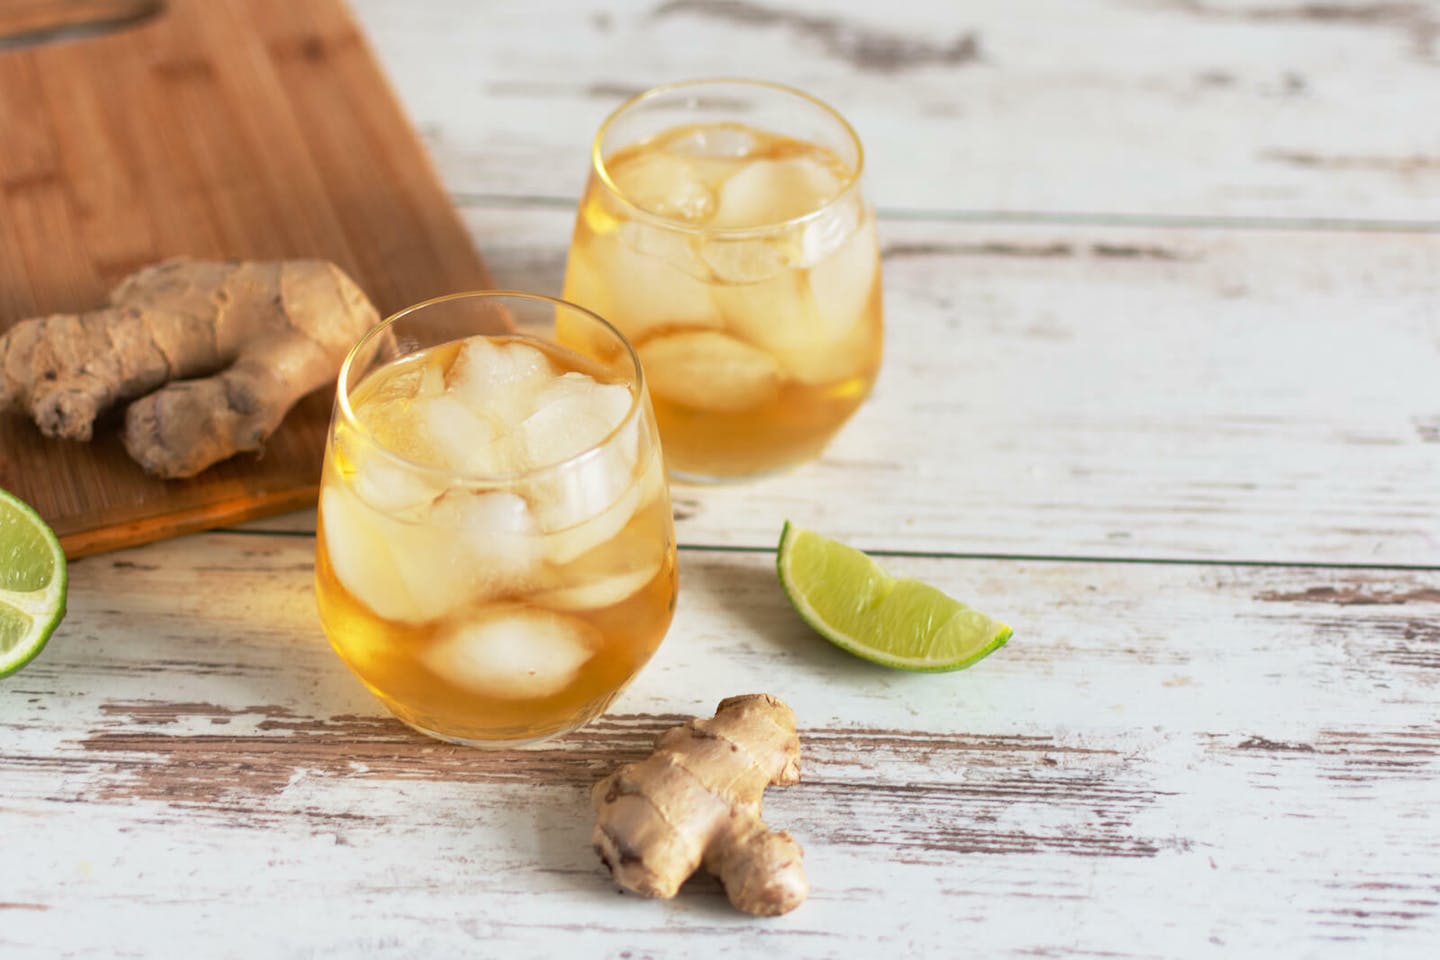 Ginger for diarrhea: Research, dosage, and side effects